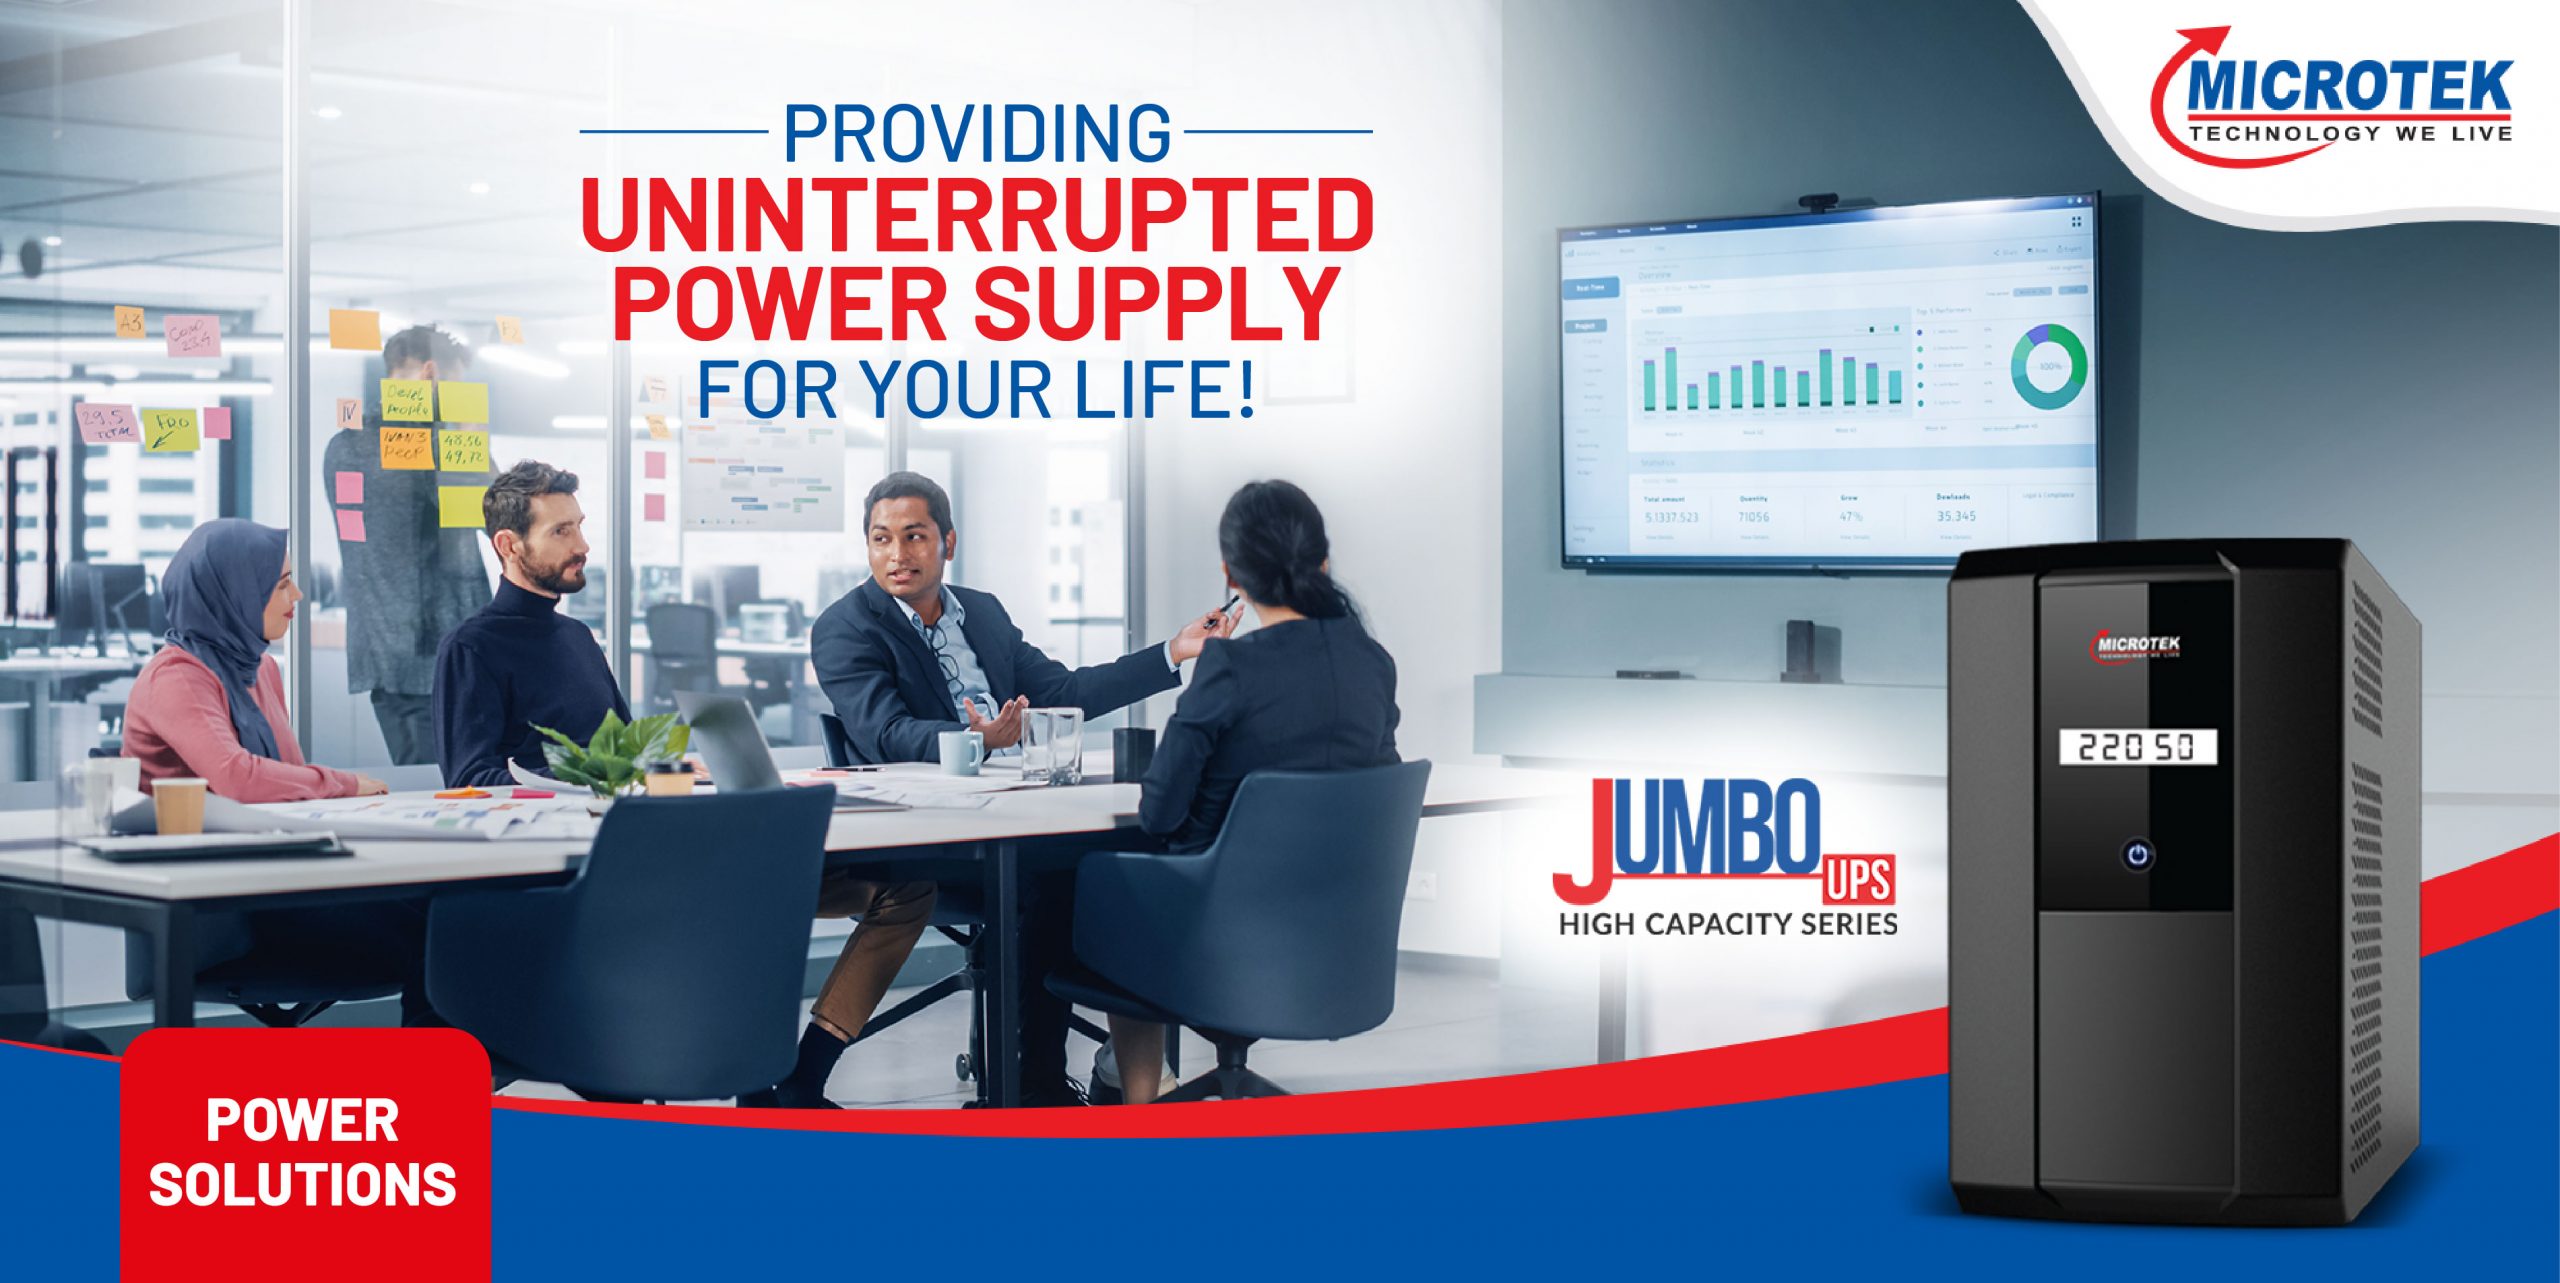 Jumbo UPS: Providing uninterrupted power supply for your life!